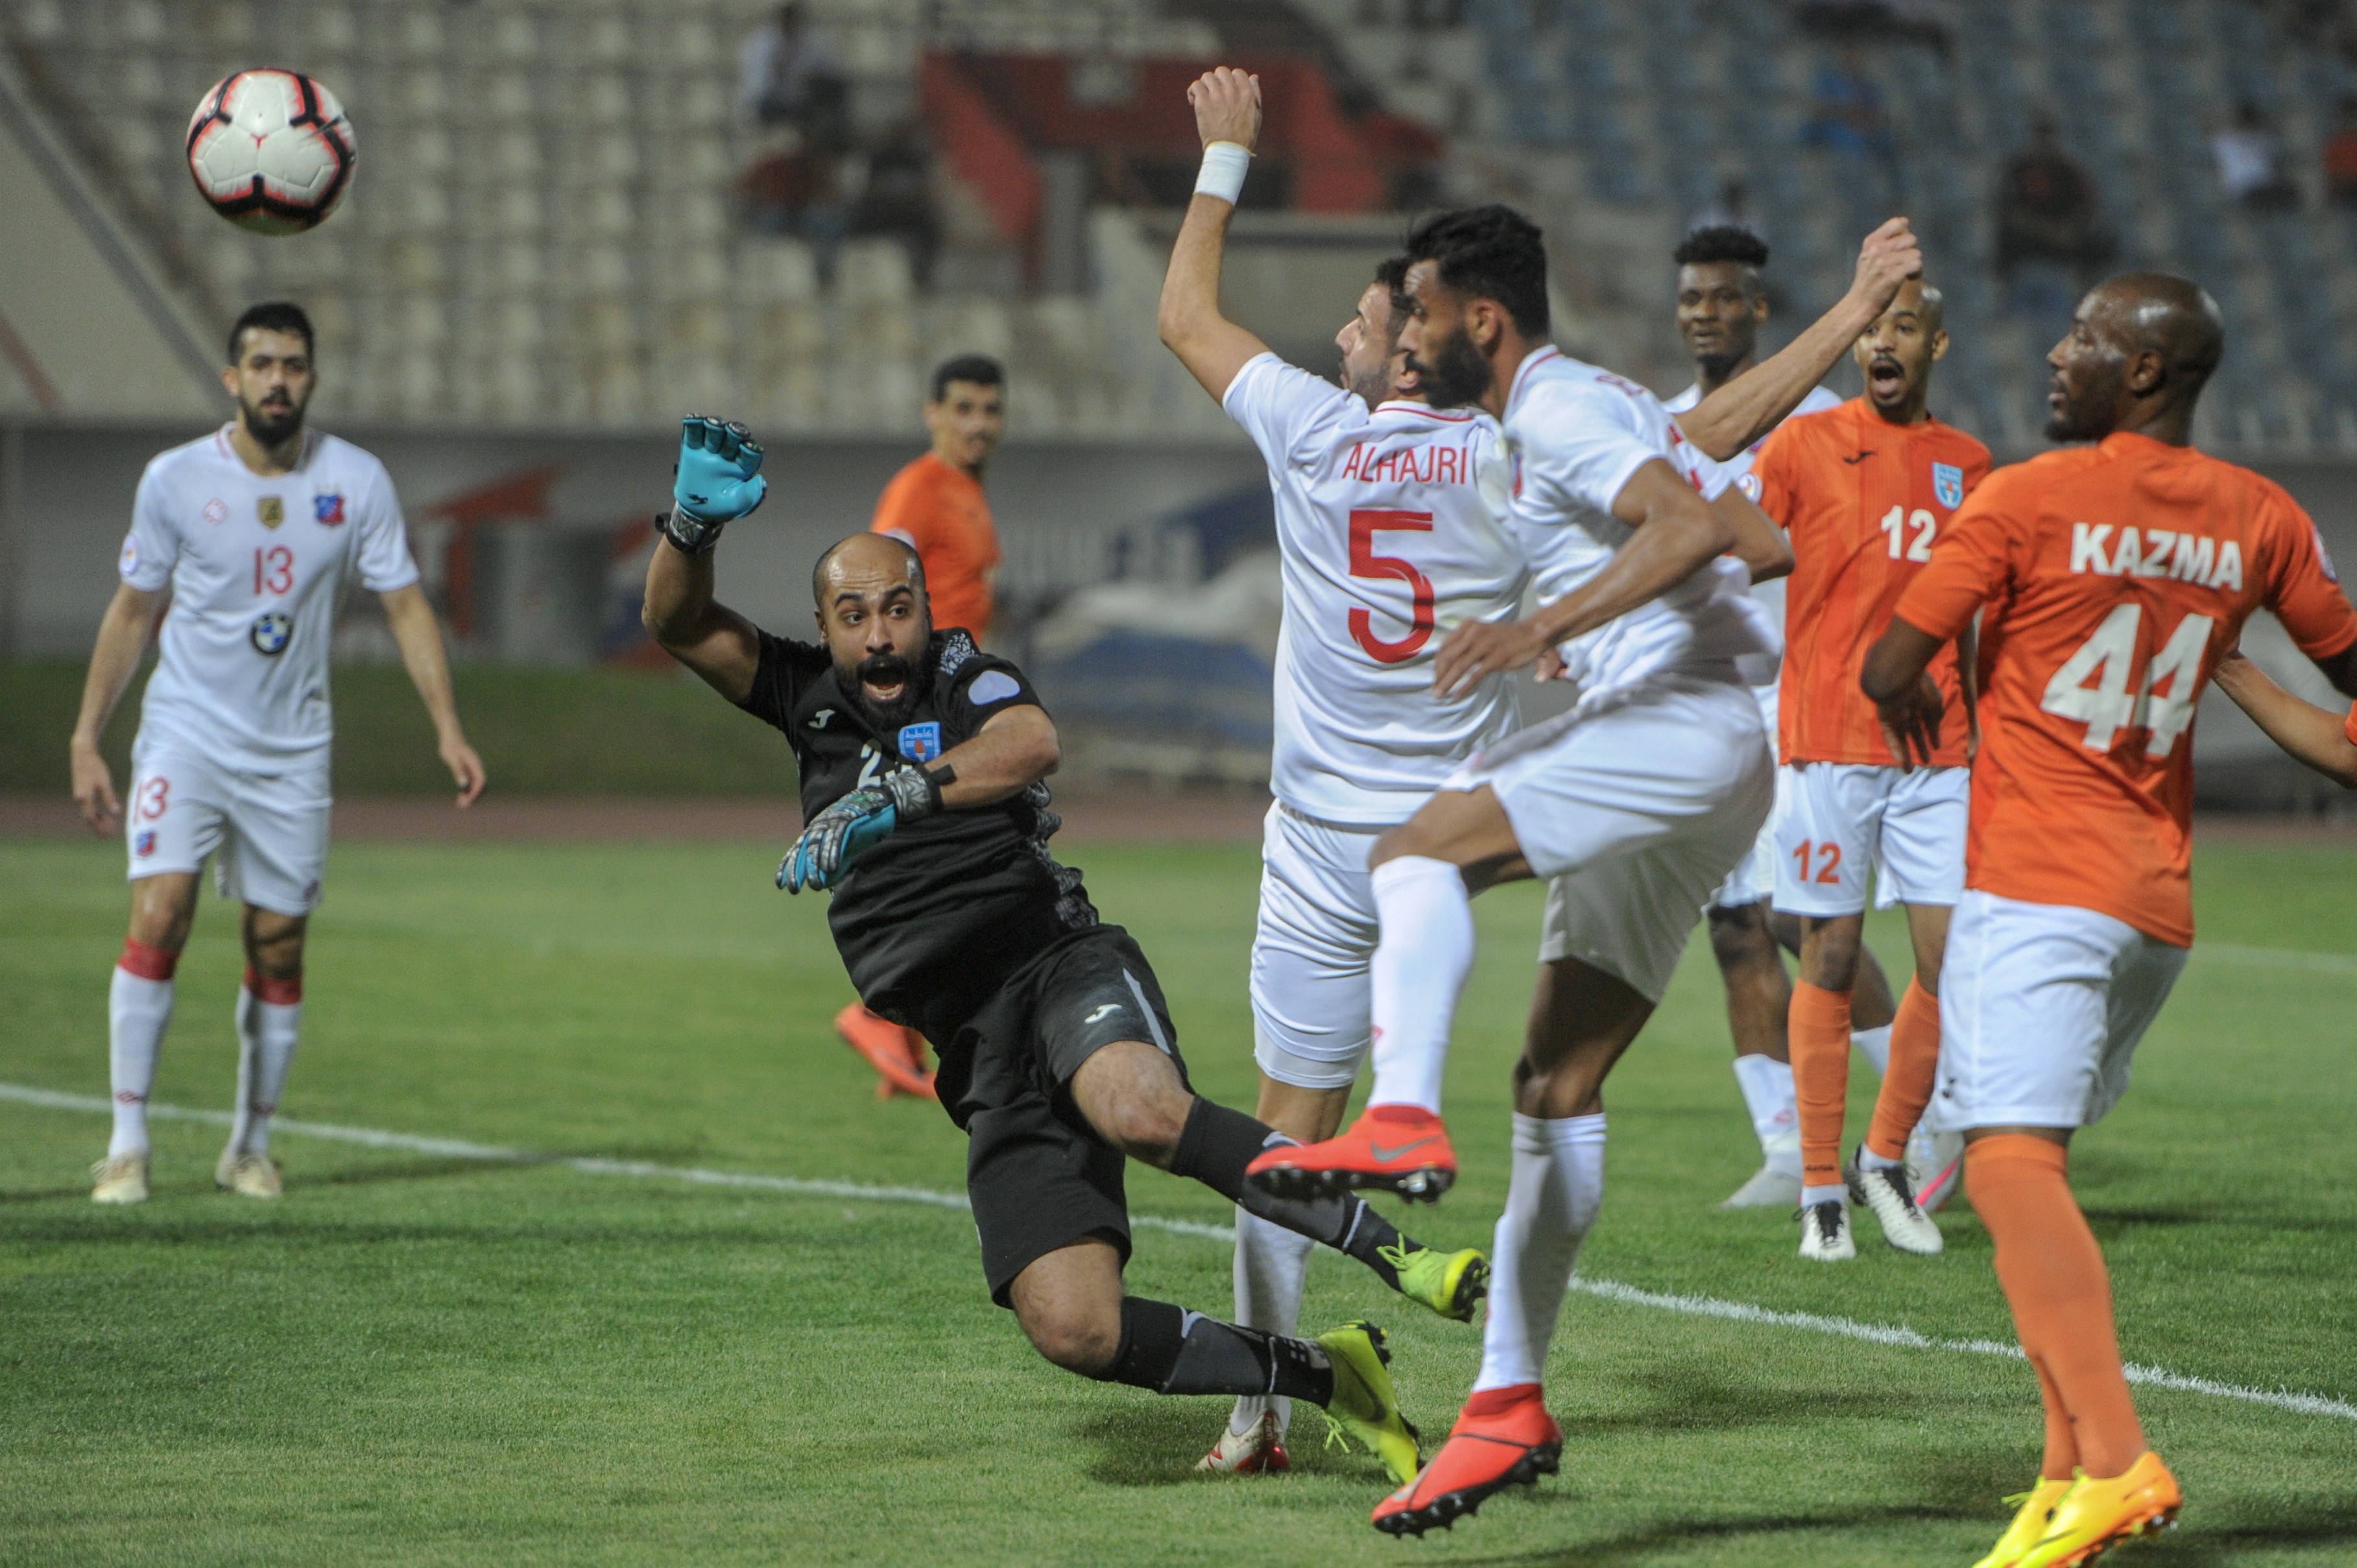 Kuwait SC snatched a valuable win over Kazma 2-1 that helped the team be close to the trophy.